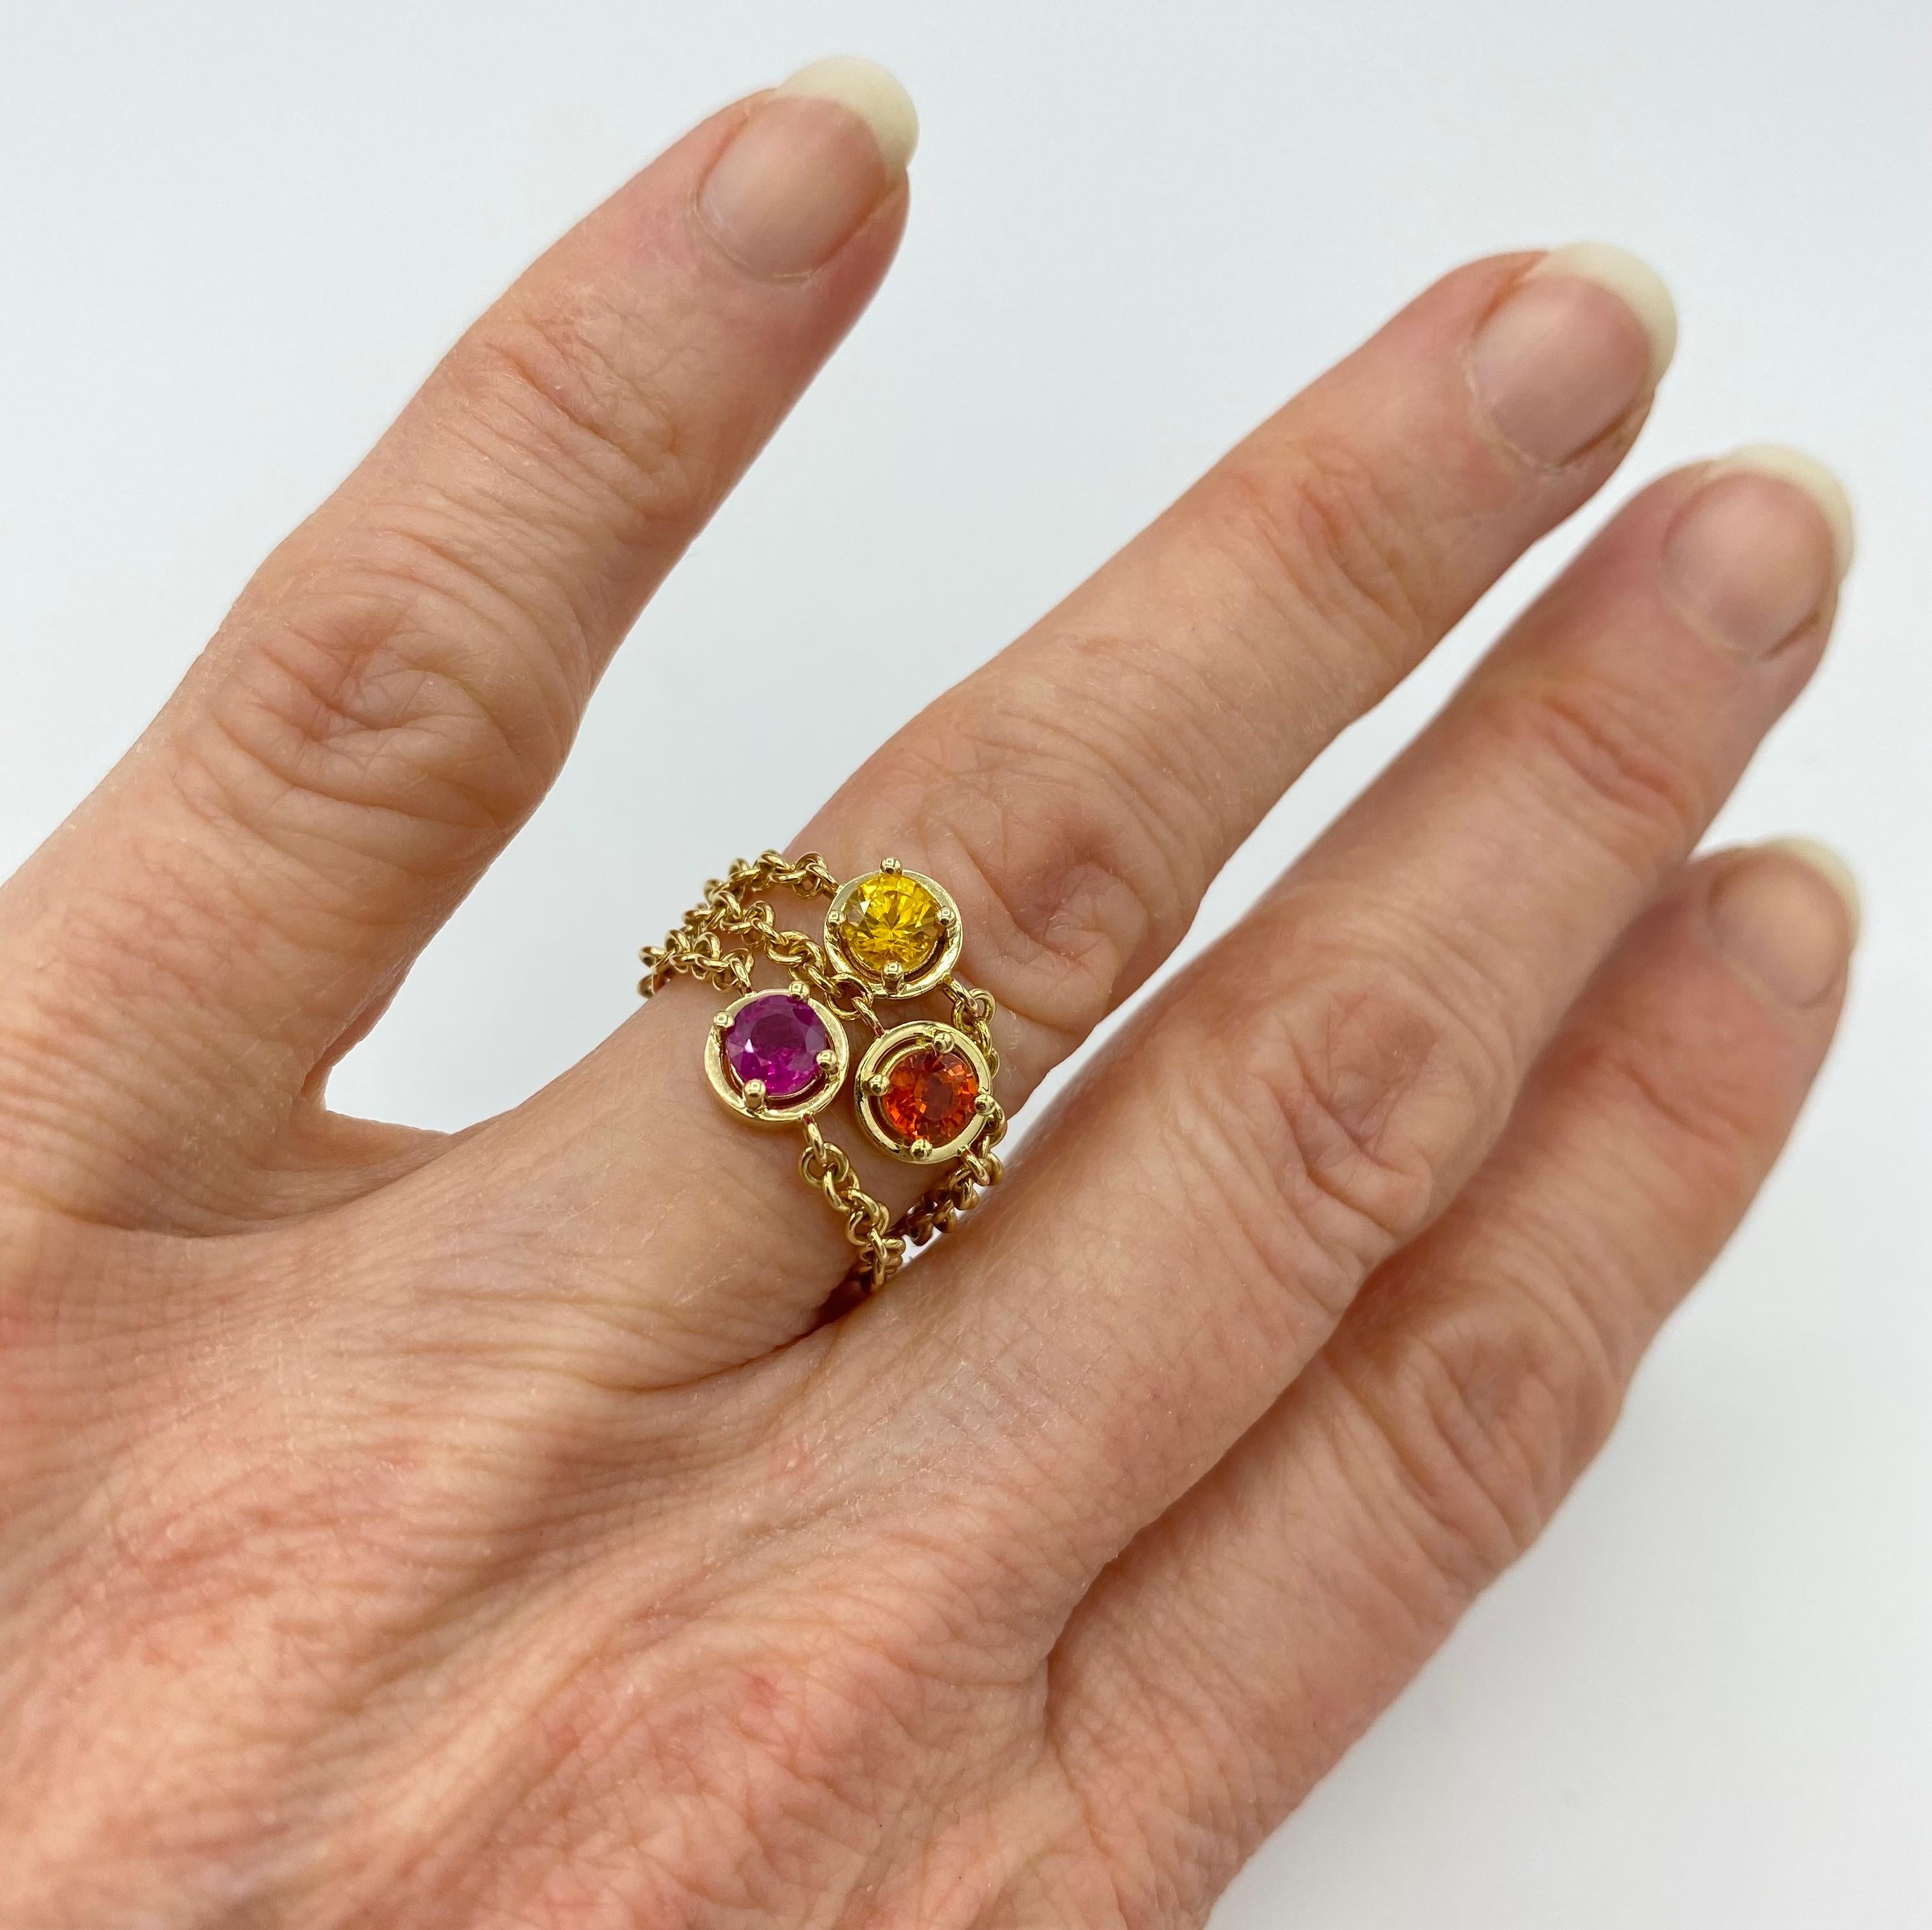 This ring is one of the first pieces of the new color line.
The completely handmade shank is an 18kt yellow gold chain, which attaches to the central griff with a 4mm ruby set.
It can be worn together with other identical rings with different stones